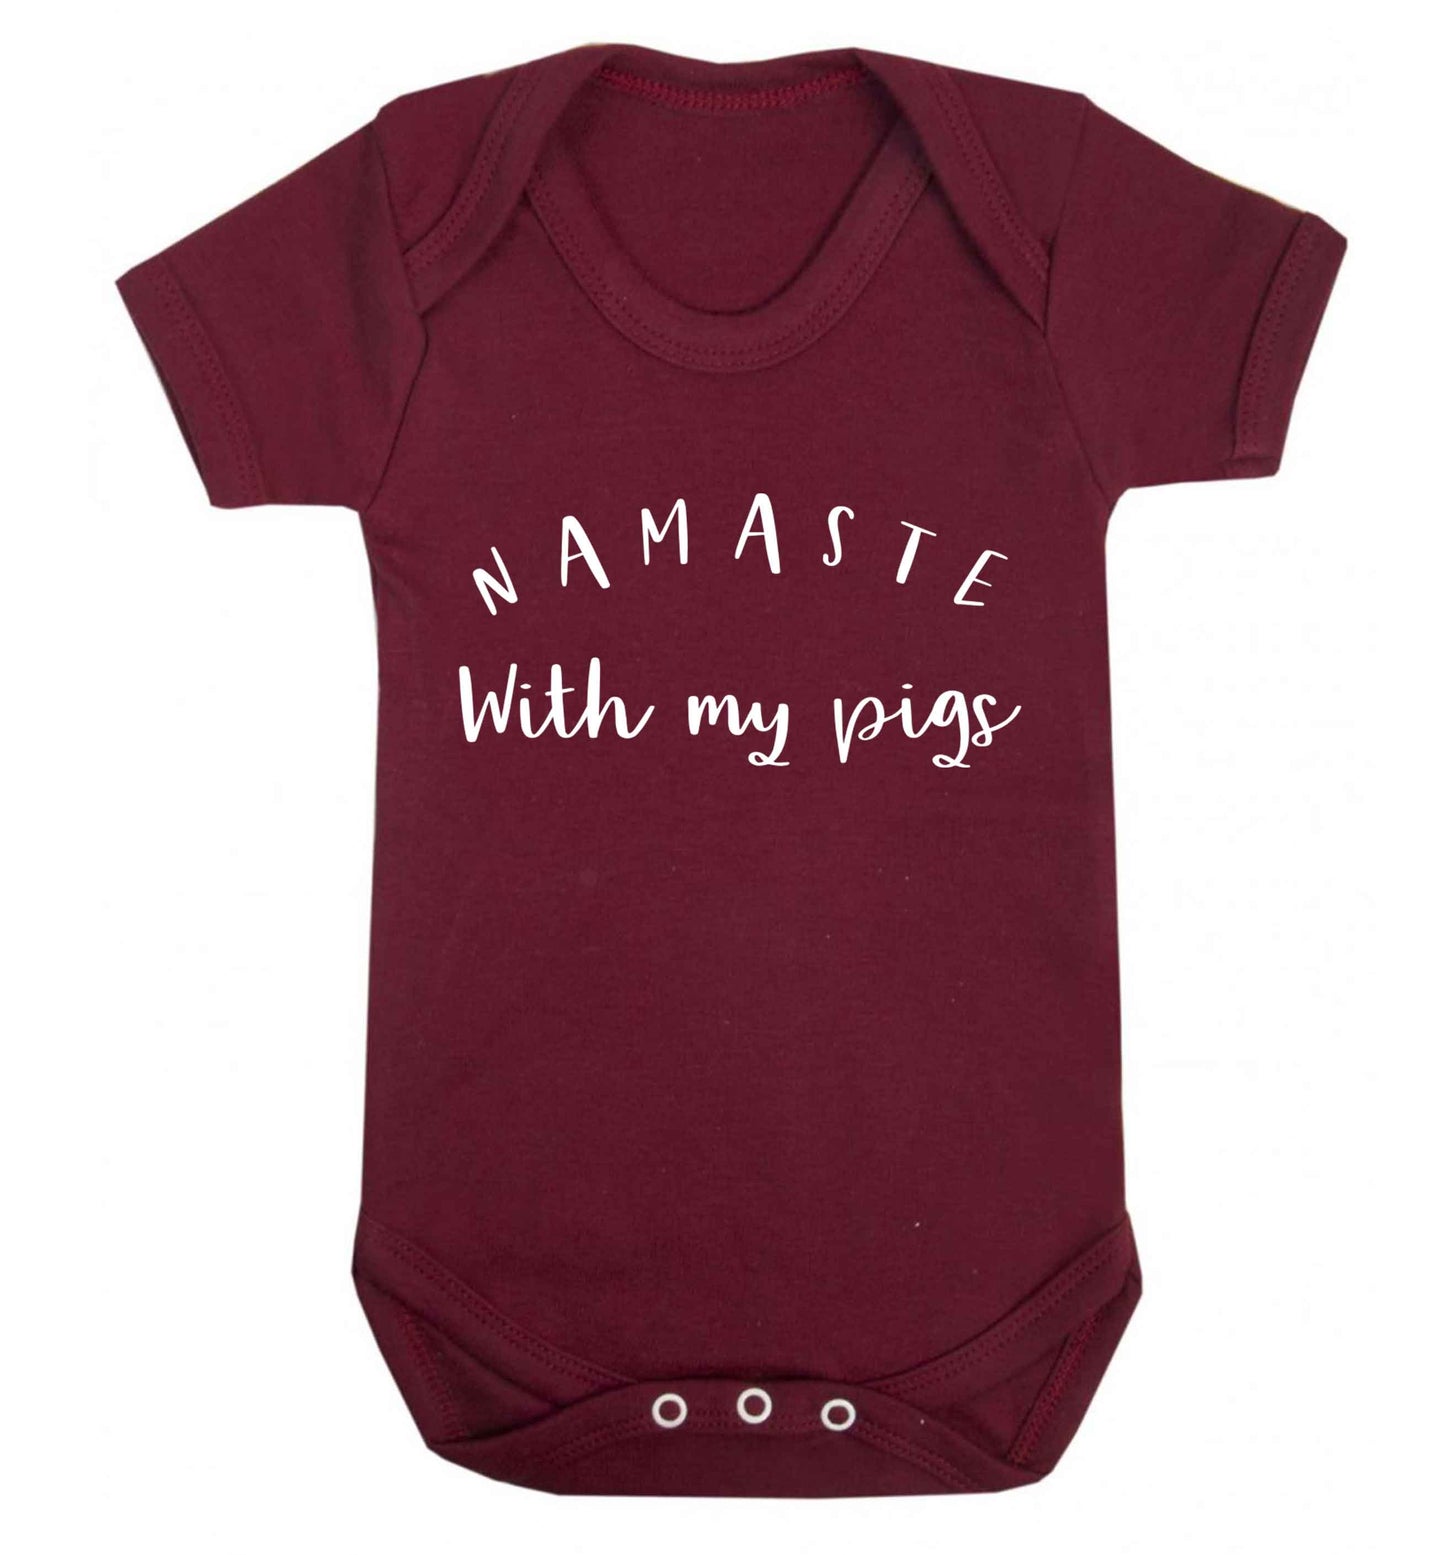 Namaste with my pigs Baby Vest maroon 18-24 months